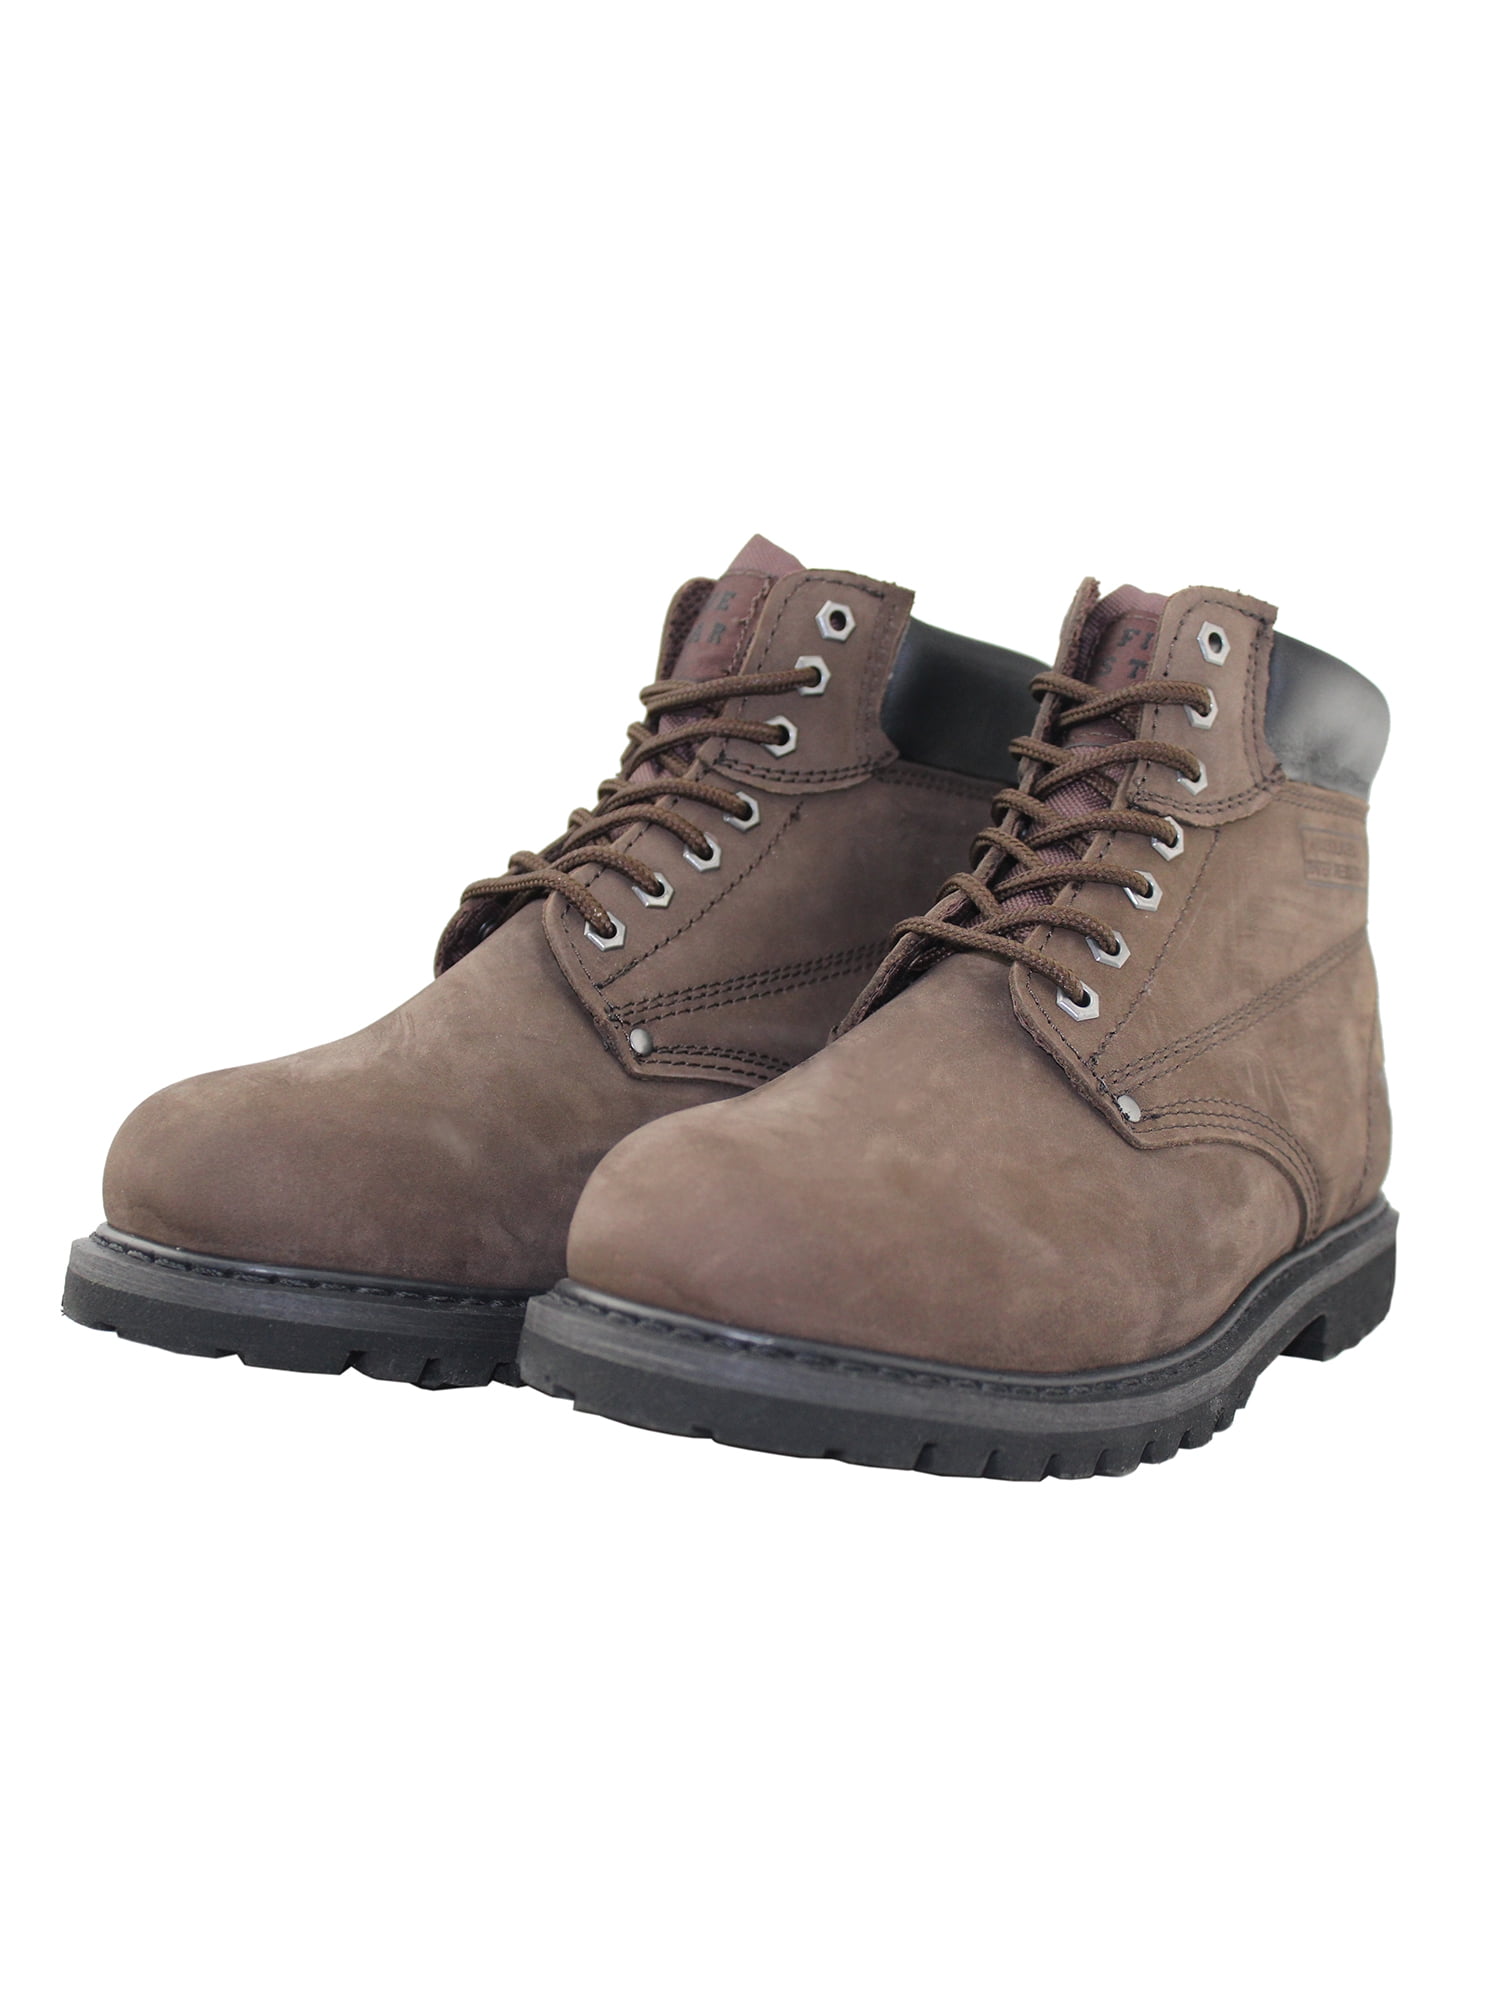 leather non slip work boots